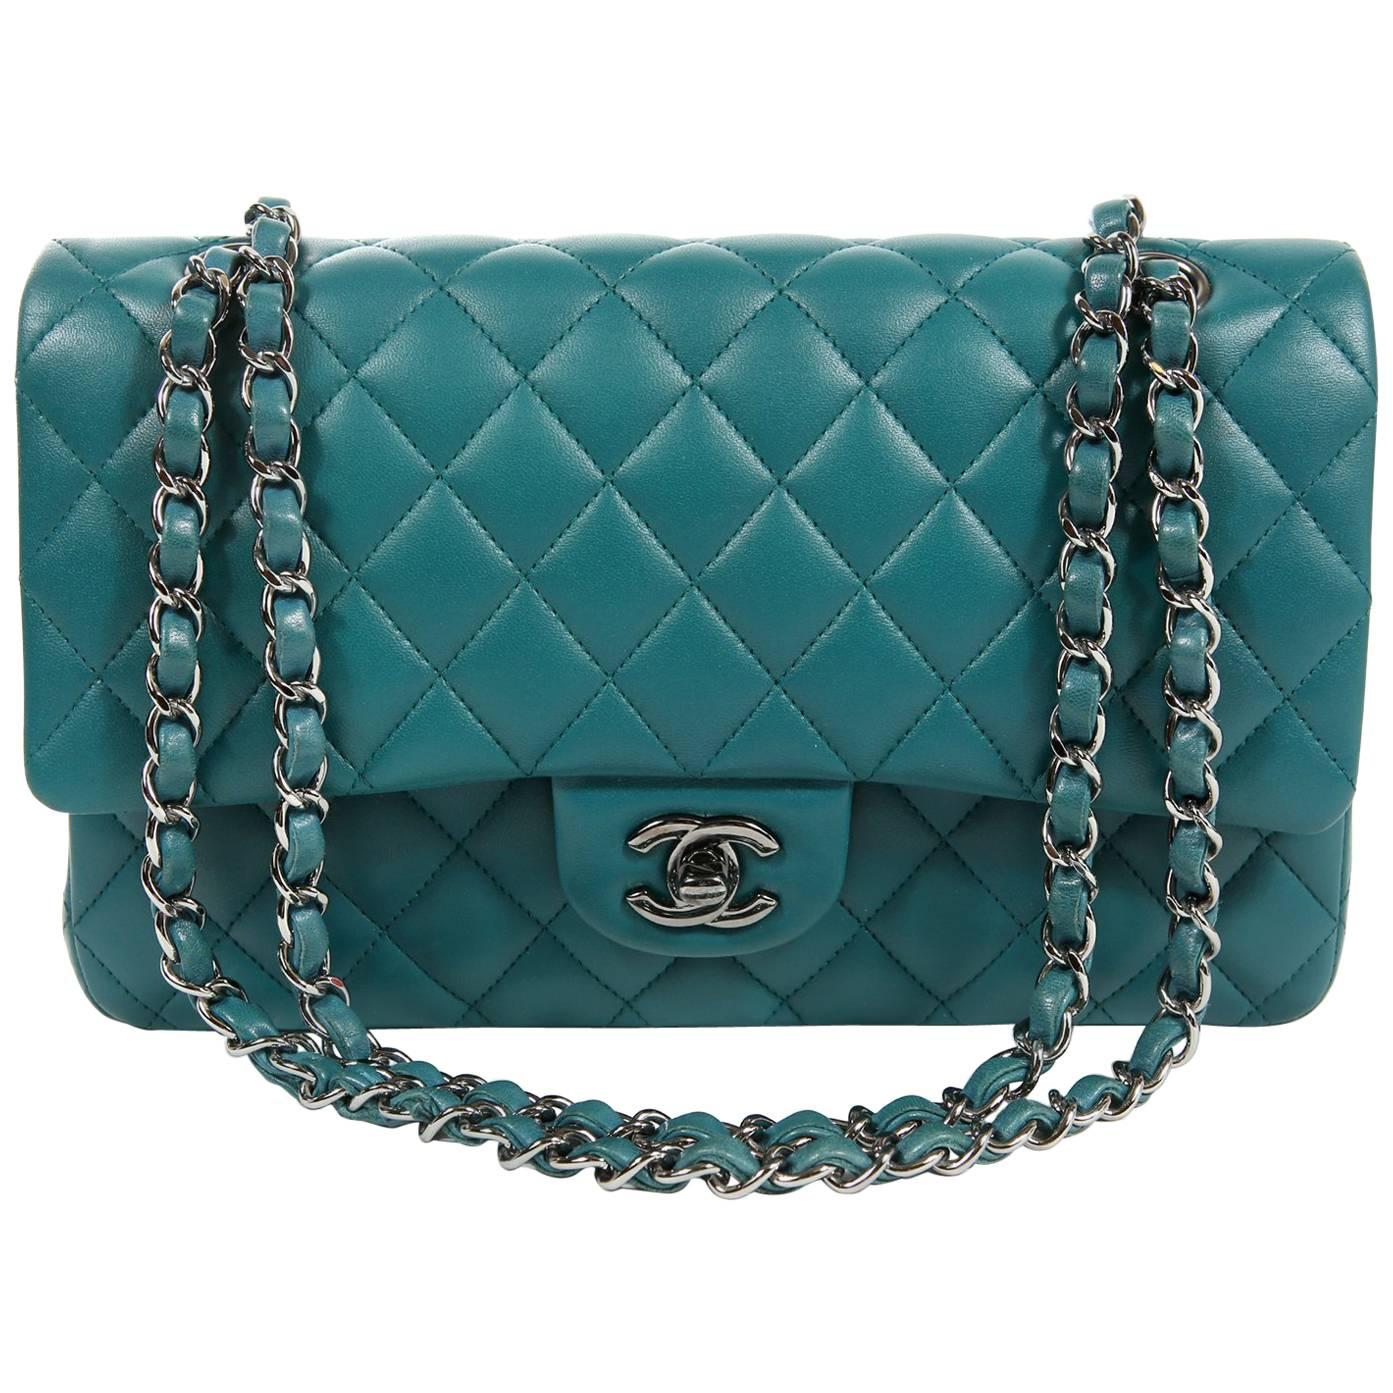 Chanel timeless double flap bag in turquoise Lambskin with gold